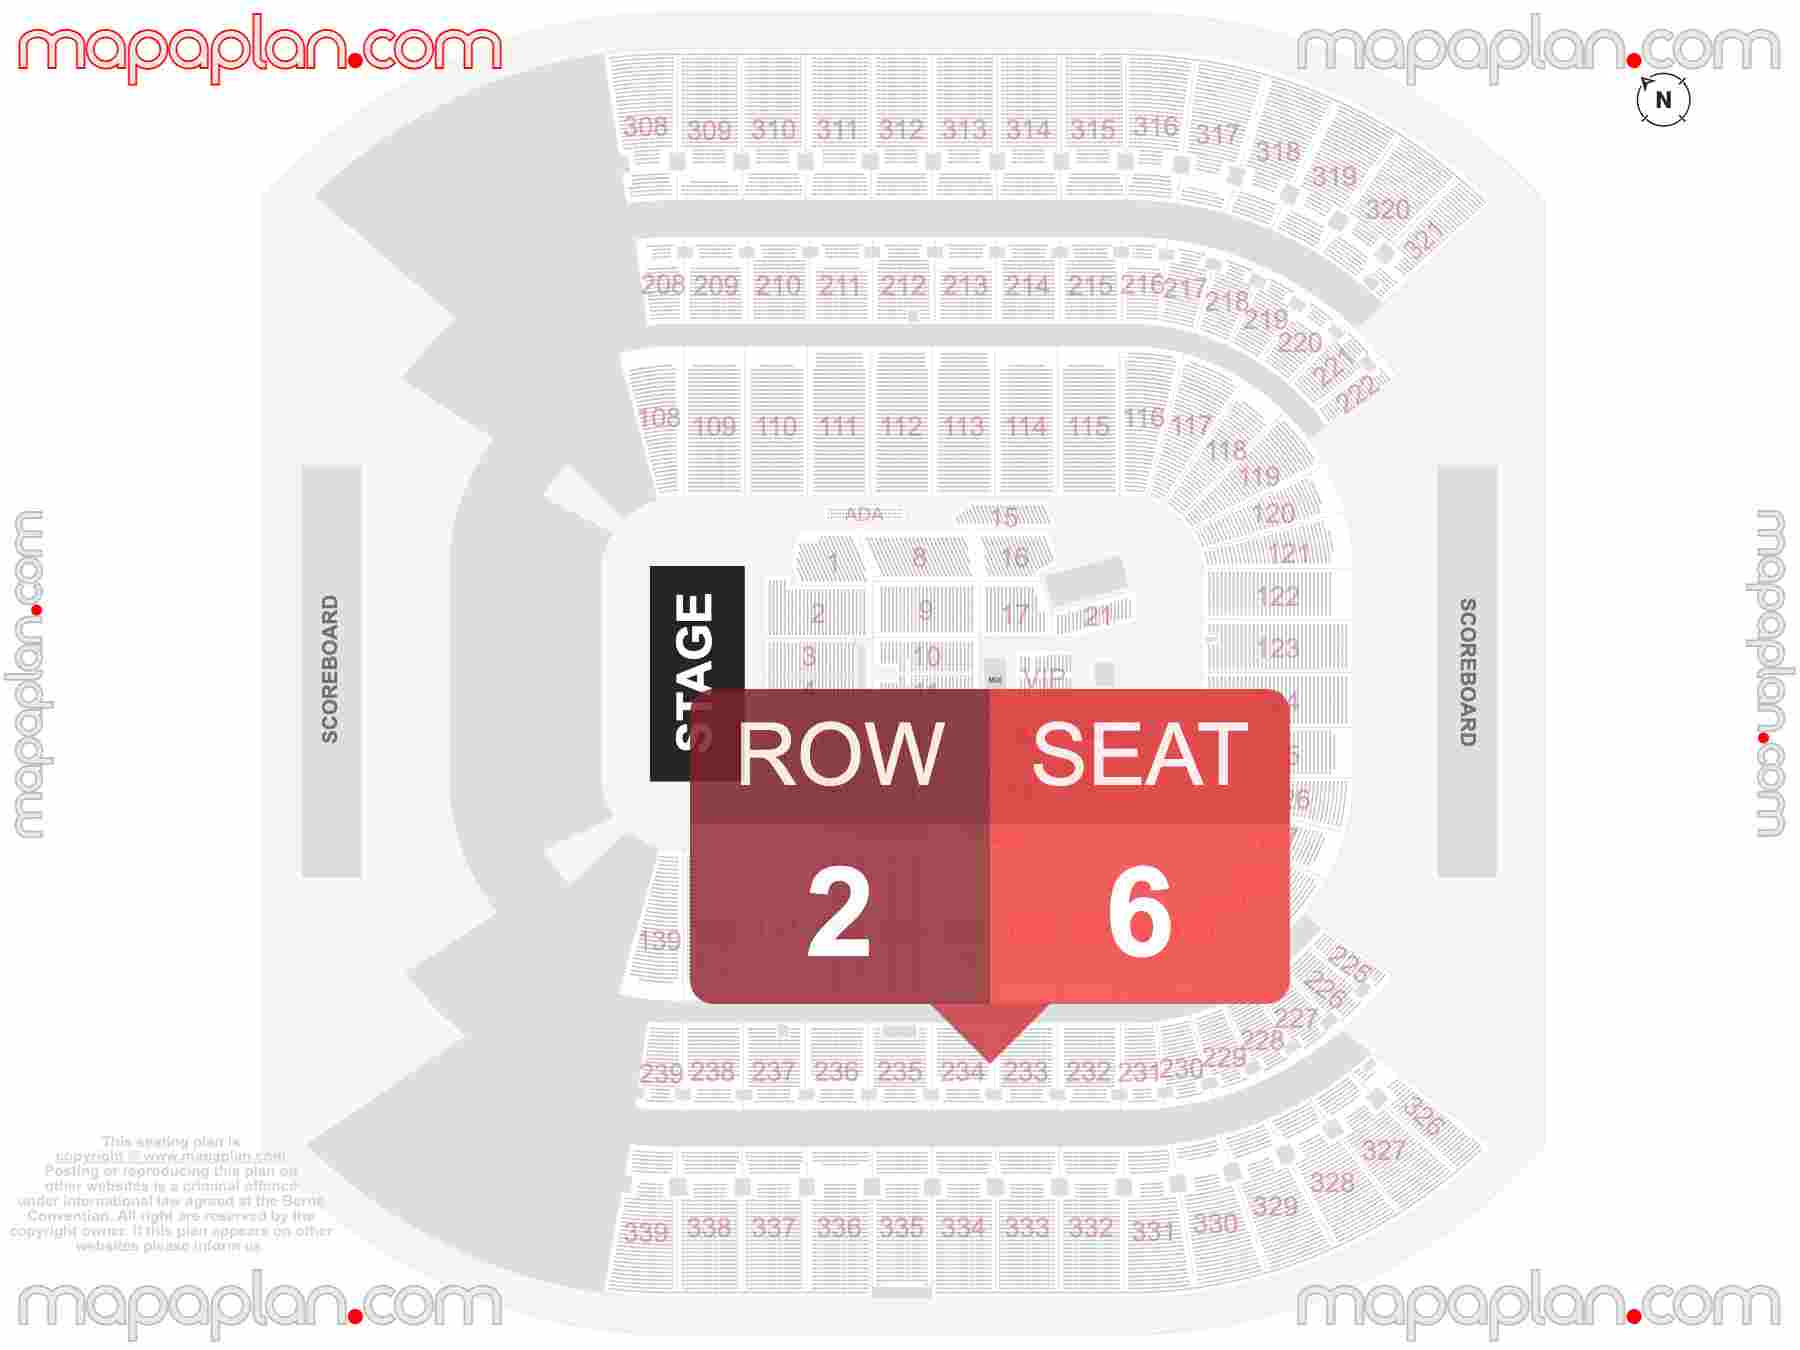 Nashville Nissan Stadium seating chart Concert detailed seat numbers and row numbering chart with interactive map plan layout